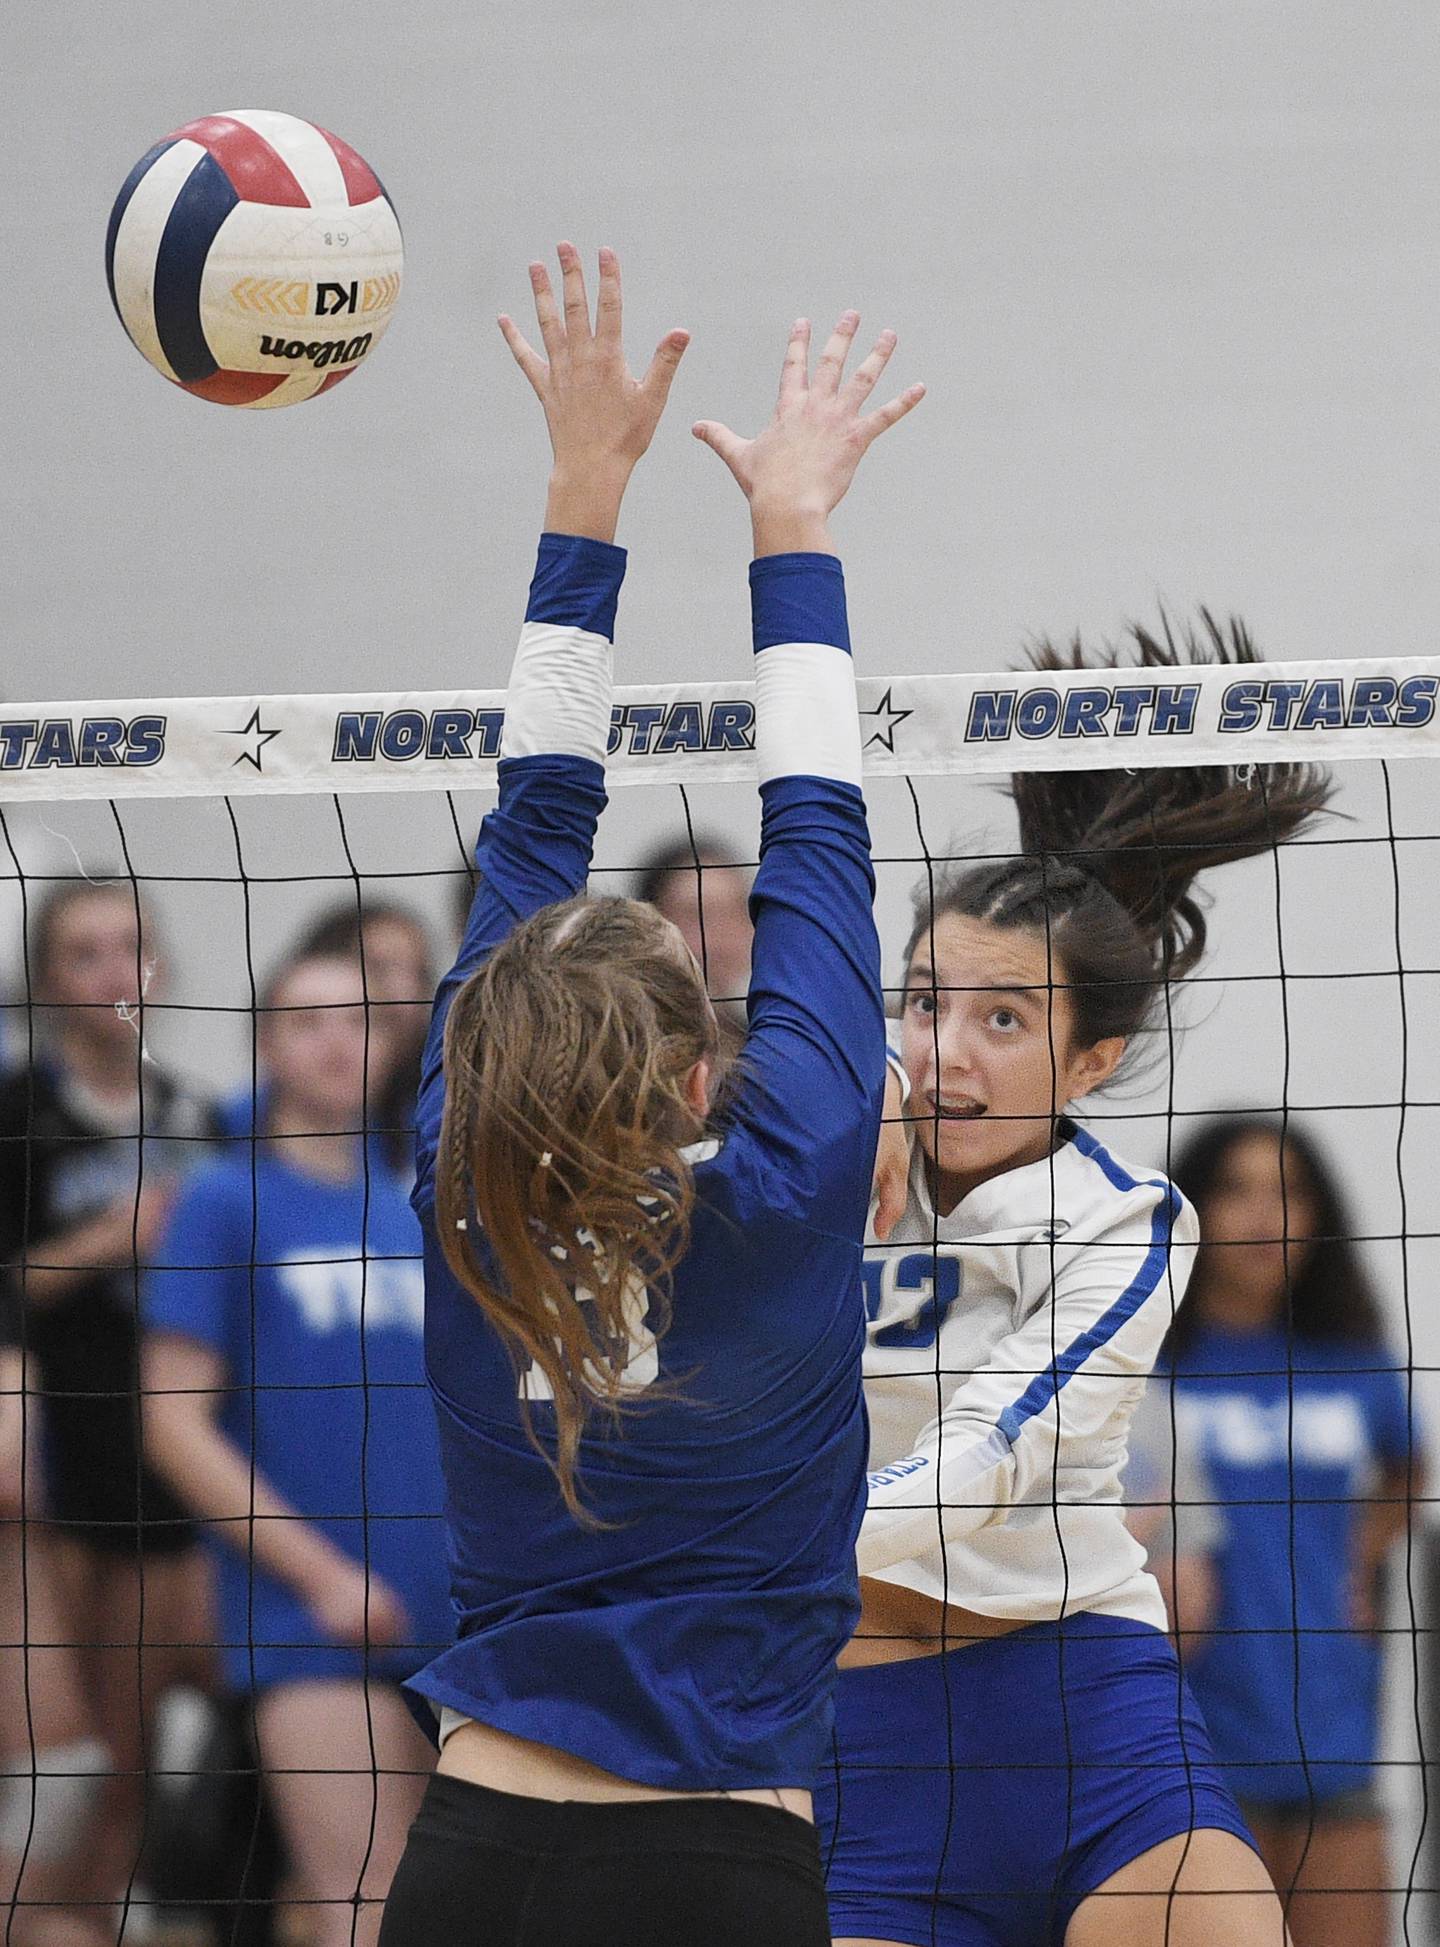 John Starks/jstarks@dailyherald.com
St. Charles North’s Haley Burgdorf gets her shot past Rosary’s Jessica Hirner in a girls volleyball game in St. Charles on Monday, August 22, 2022.